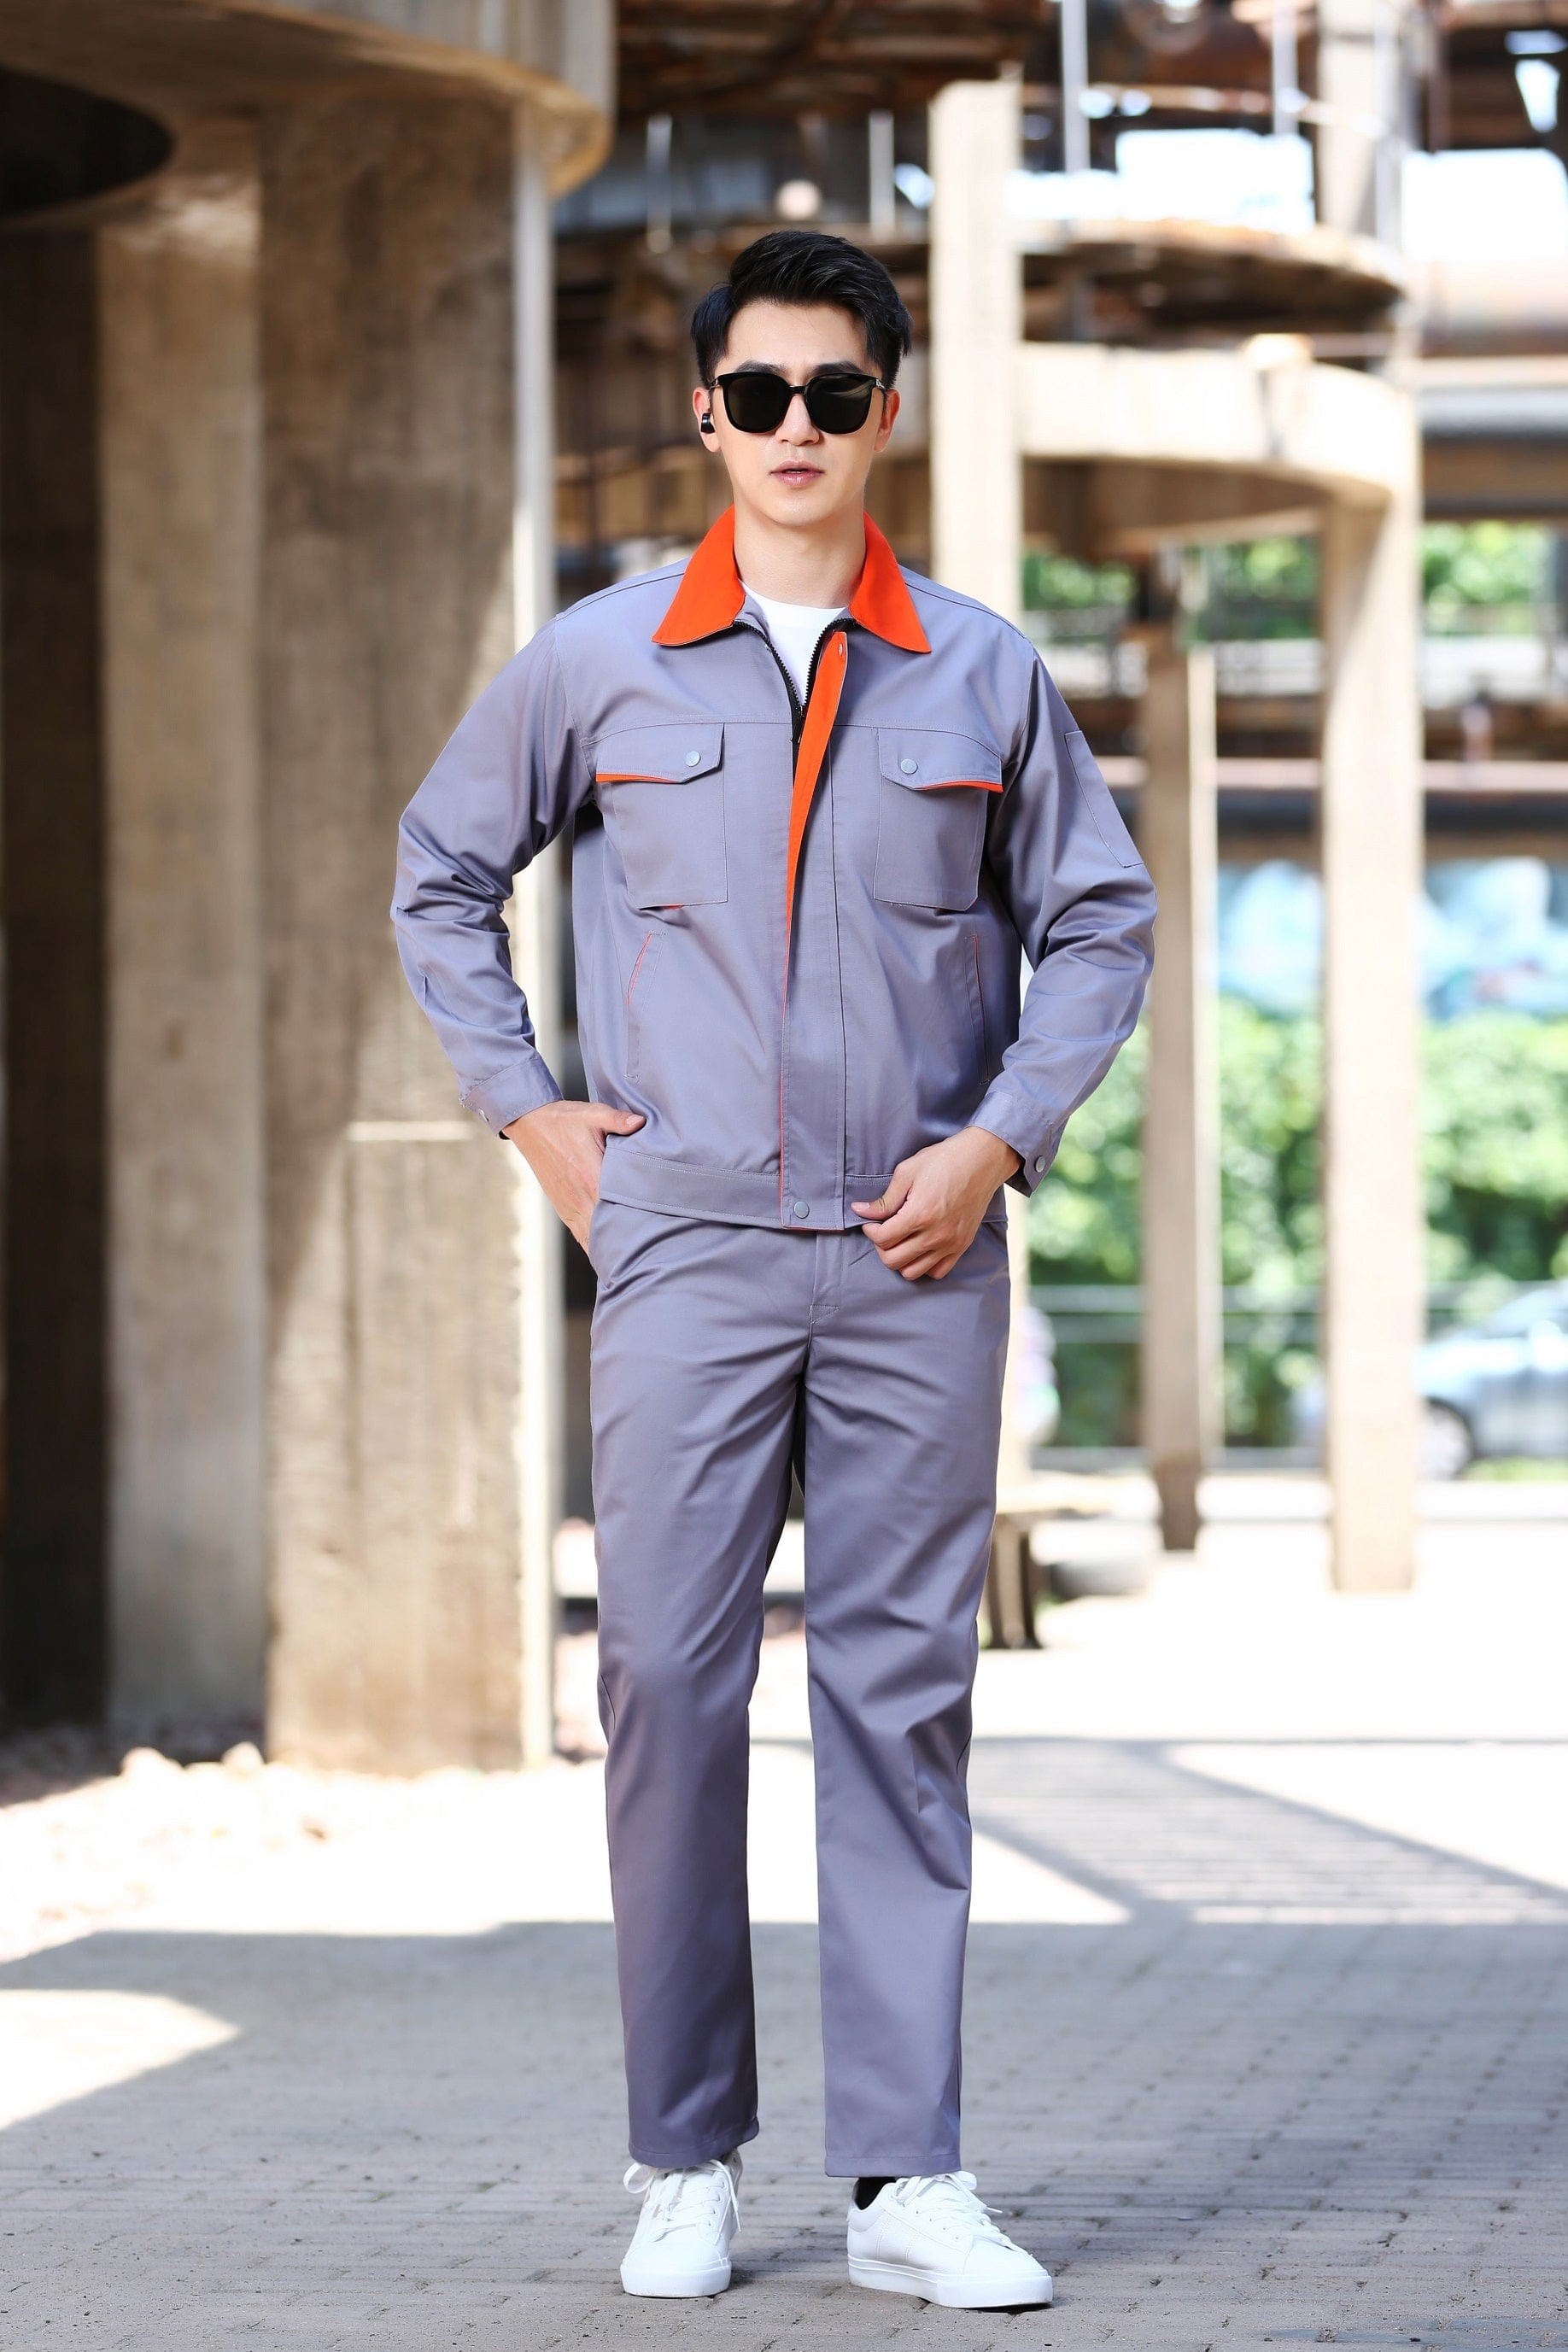 Corals Trading Co. 可樂思百貨商行 涤棉 Spring and Autumn Long Sleeve Polyester-Cotton Workwear SD-W804